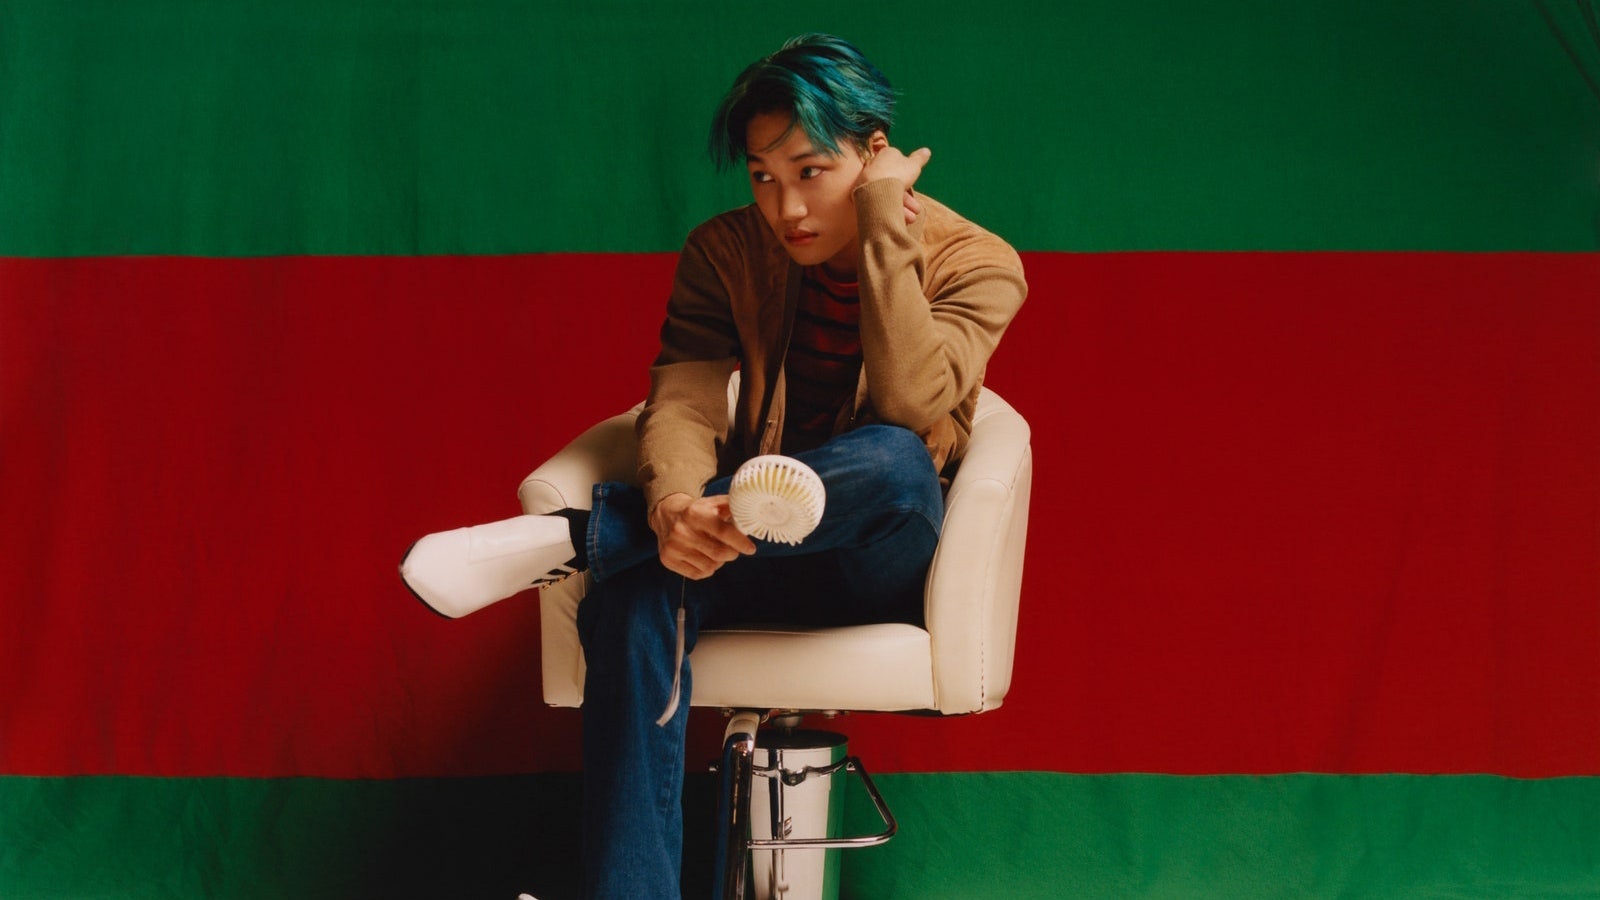 These days, China influencers have become a crucial investment. But how can luxury brands keep from picking the wrong one? Photo: Courtesy of Gucci